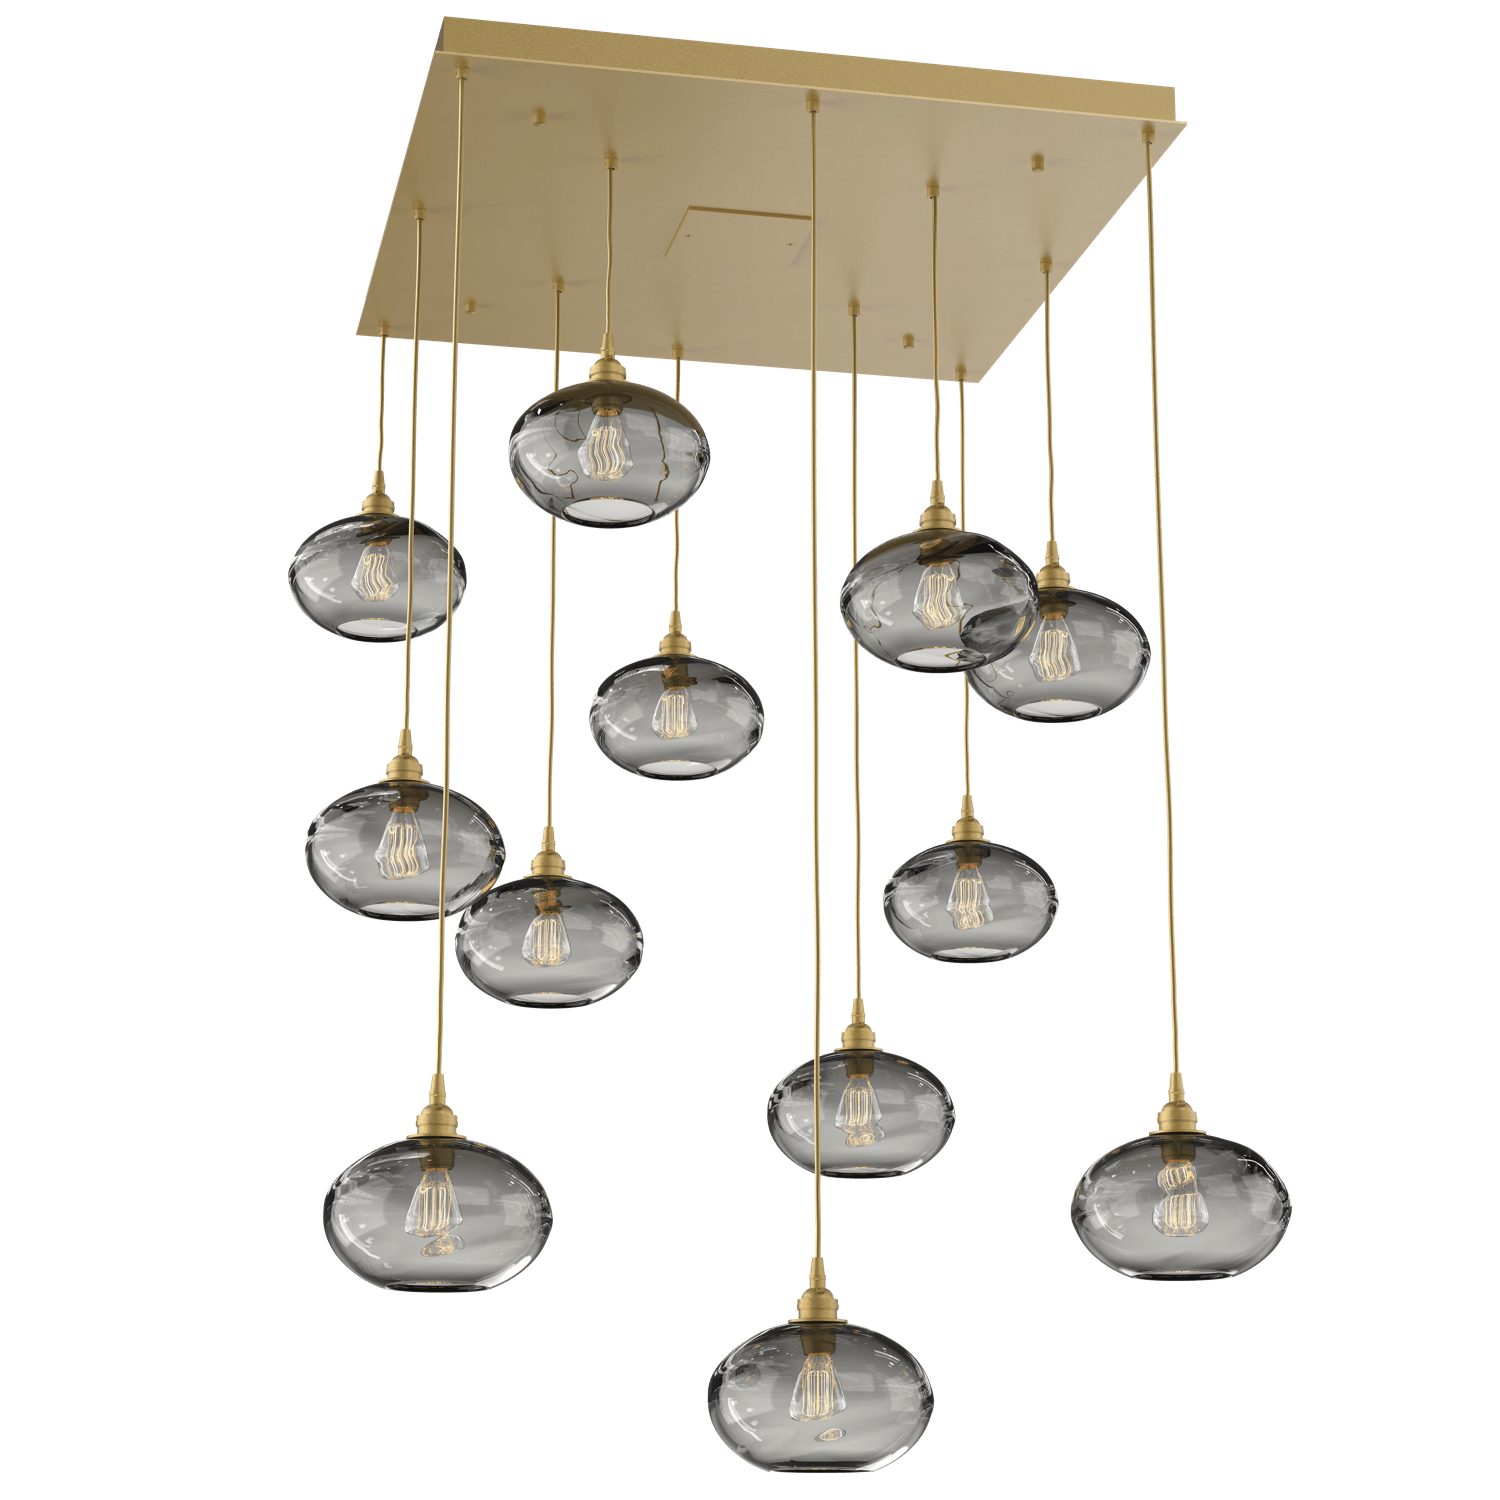 CHB0036-12-GB-OS-Hammerton-Studio-Optic-Blown-Glass-Coppa-12-light-square-pendant-chandelier-with-gilded-brass-finish-and-optic-smoke-blown-glass-shades-and-incandescent-lamping